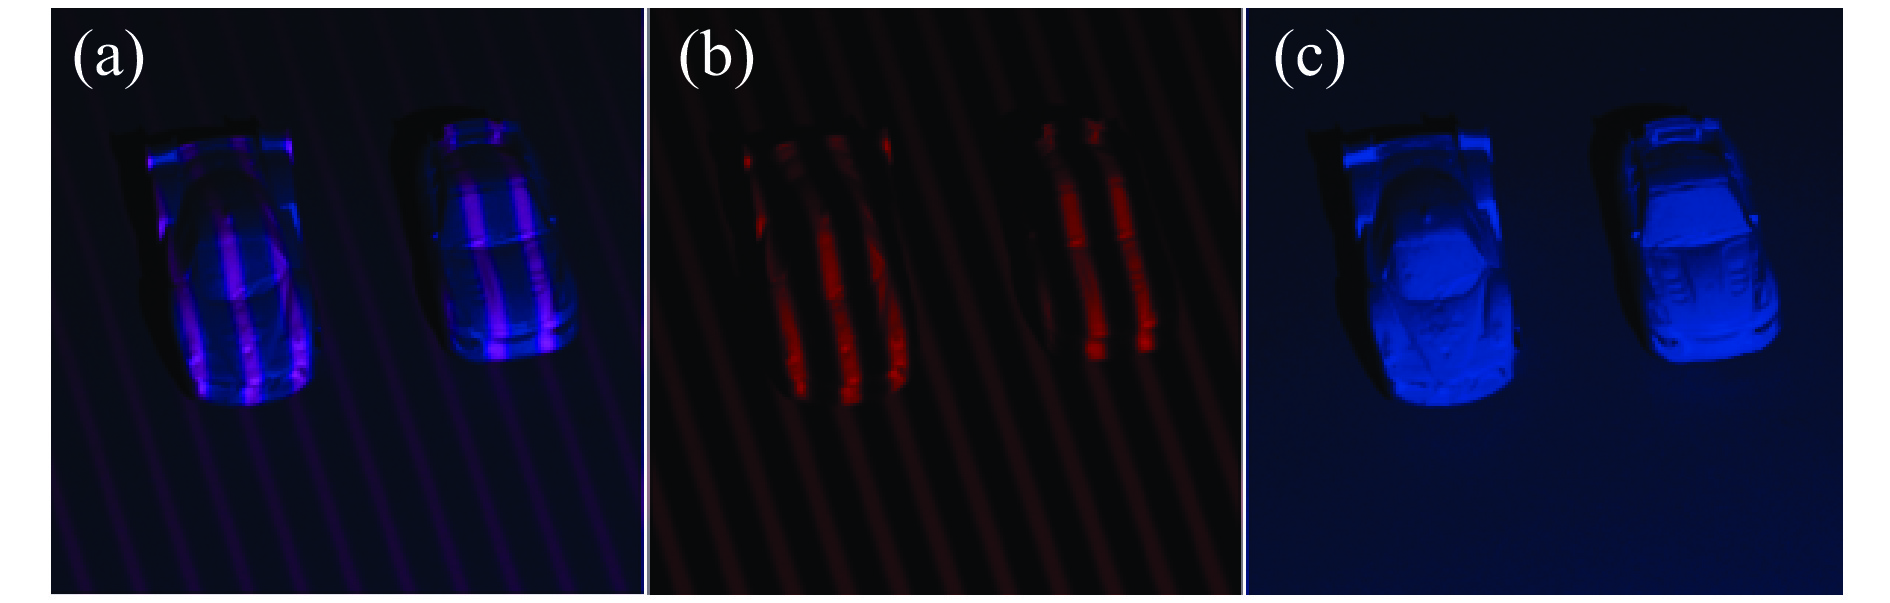 Images in different channels. (a) Captured object image; (b) Red channel image of Fig. 2 (a); and (c) the blue channel image of Fig. 2 (a)